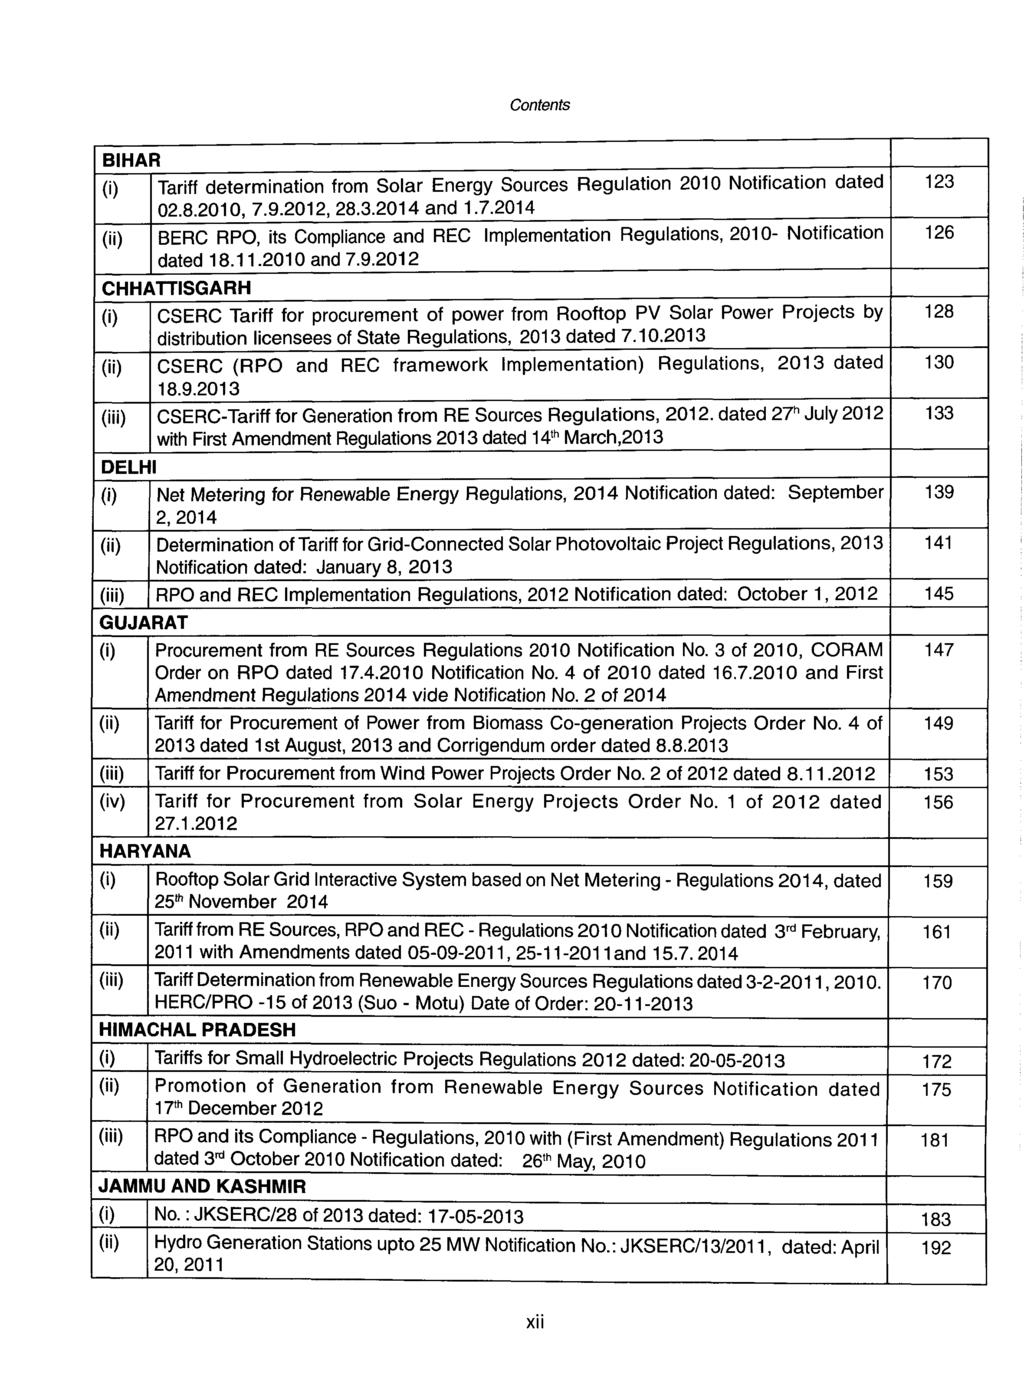 BIHAR Tariff determination from Solar Energy Sources Regulation 2010 Notification dated 02.8.2010. 7.9.2012, 28.3.2014 and 1.7.2014 (") BERC RPO, its Compliance and REC Implementation Regulations, 2010- Notification dated 18.